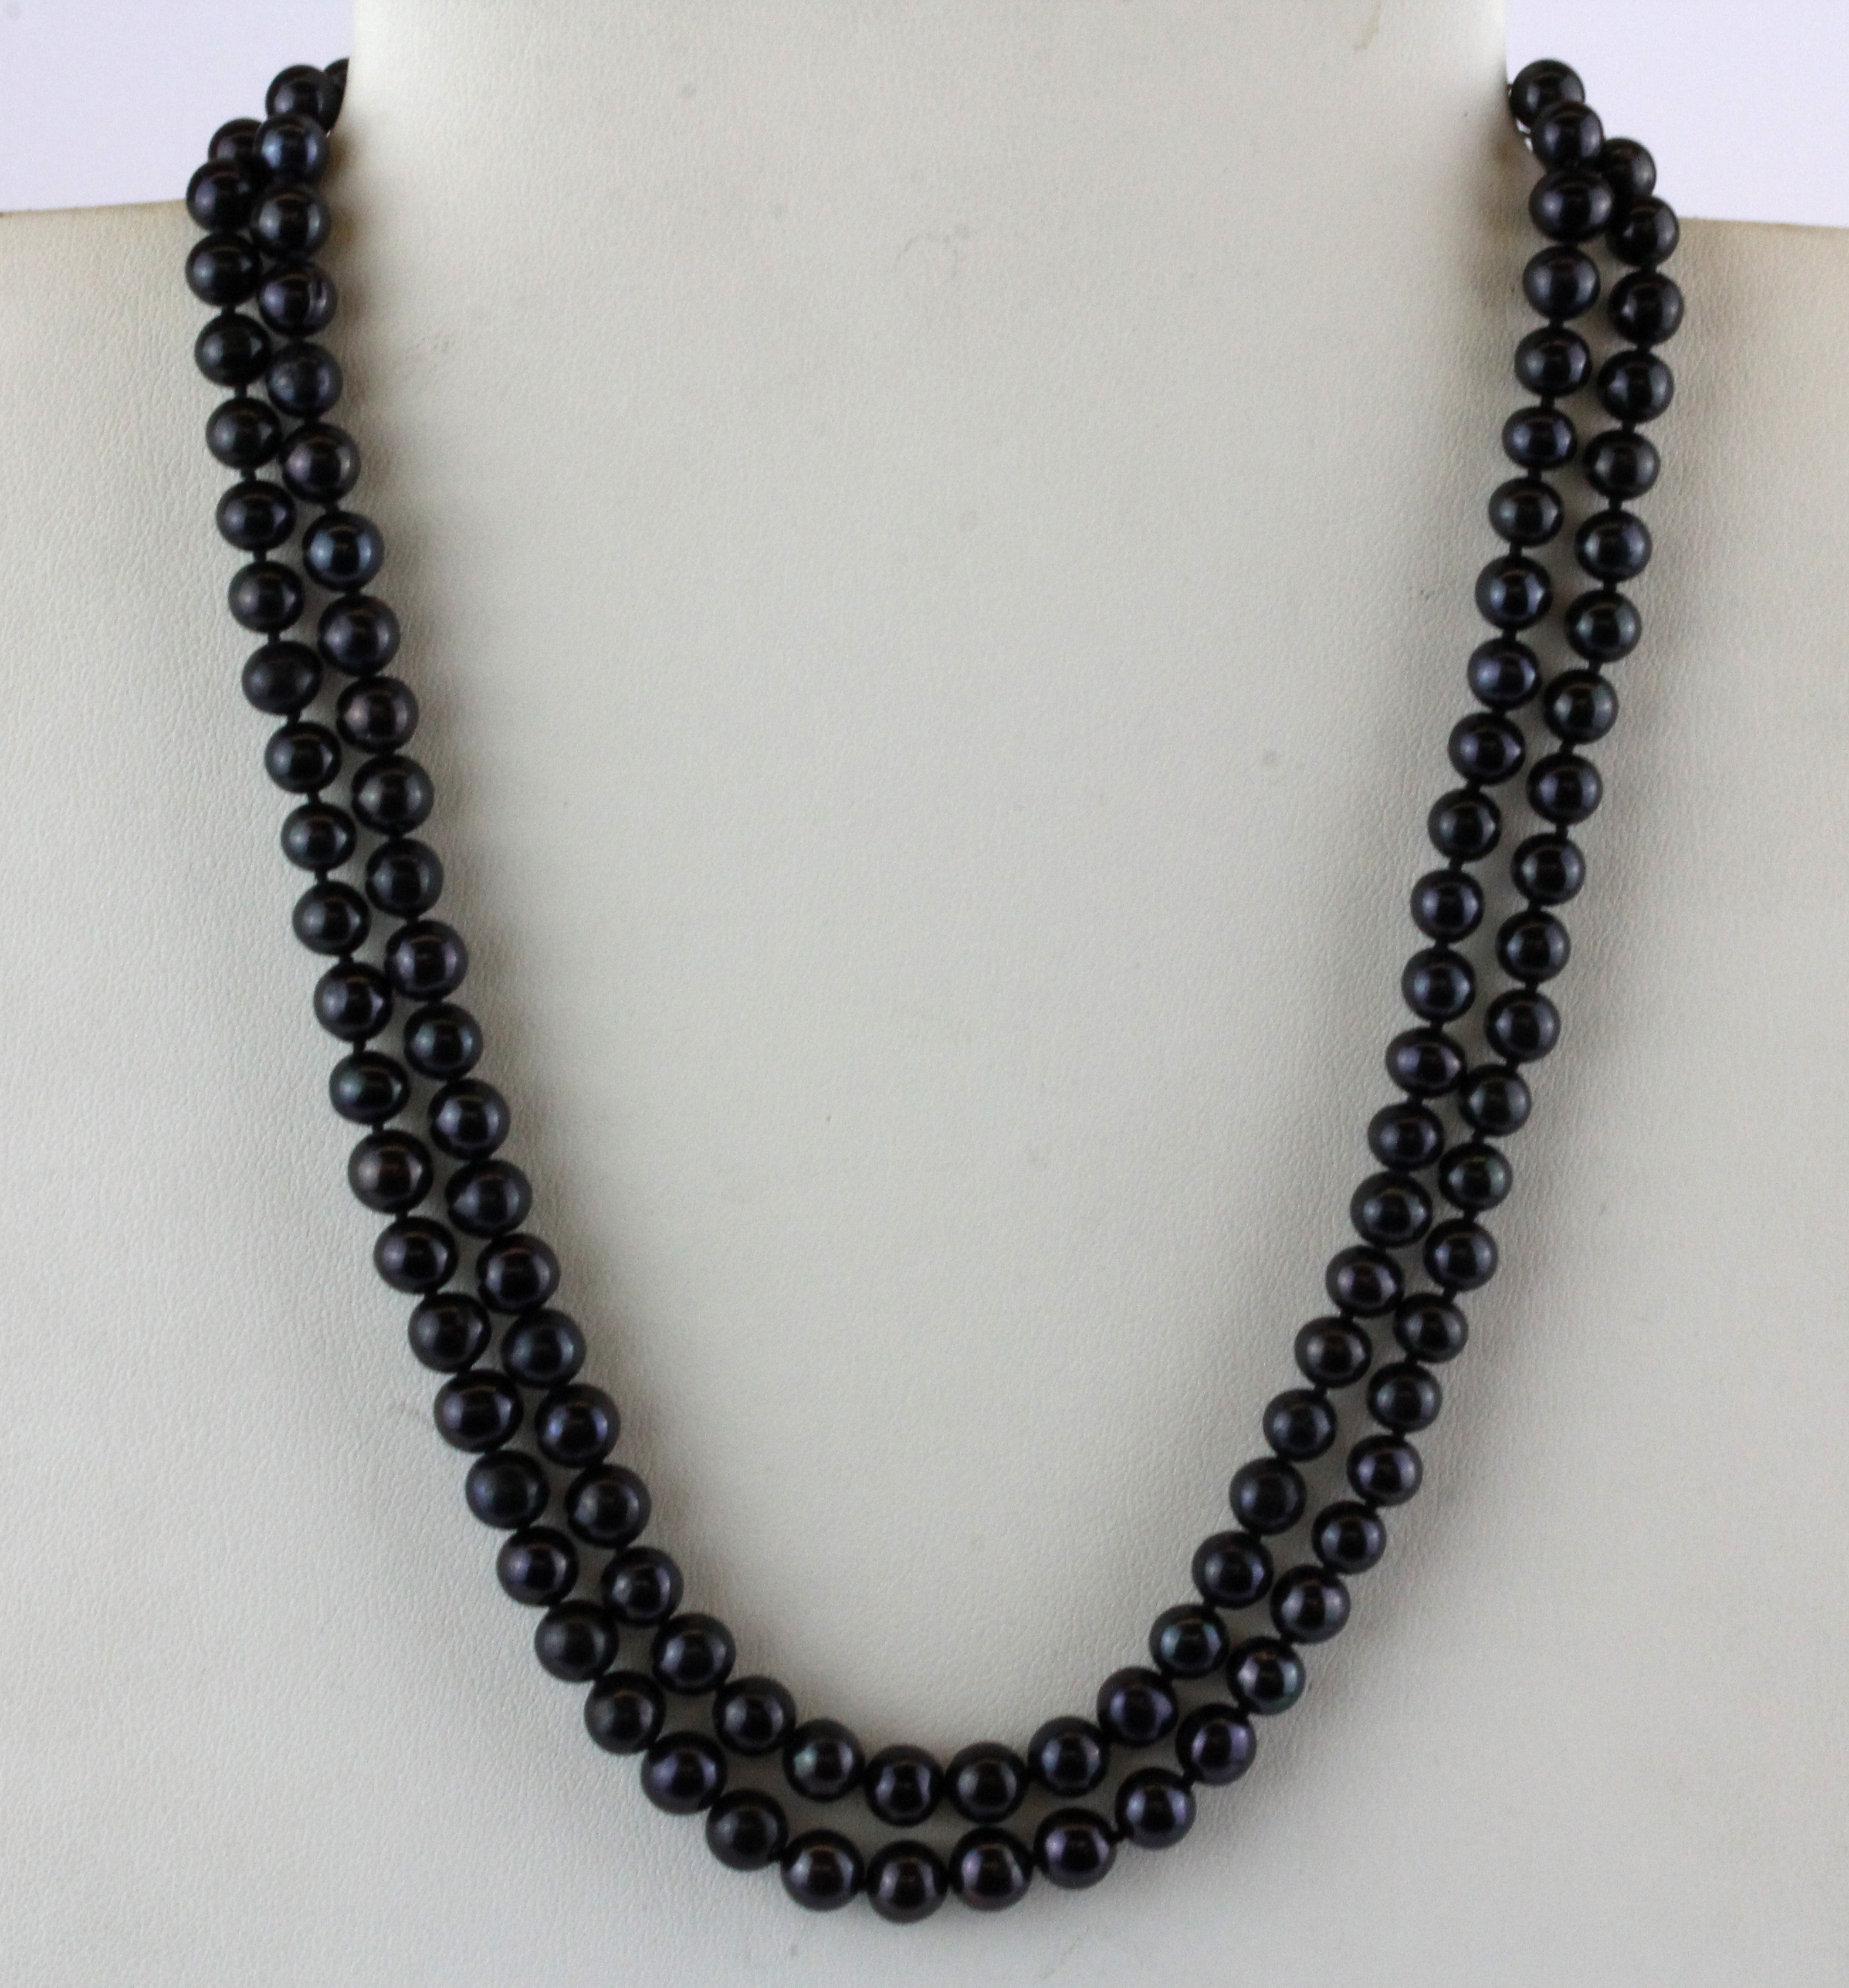 A vintage necklace of black cultured pearls with a white porcelain decorated clasp, pear size 6mm.